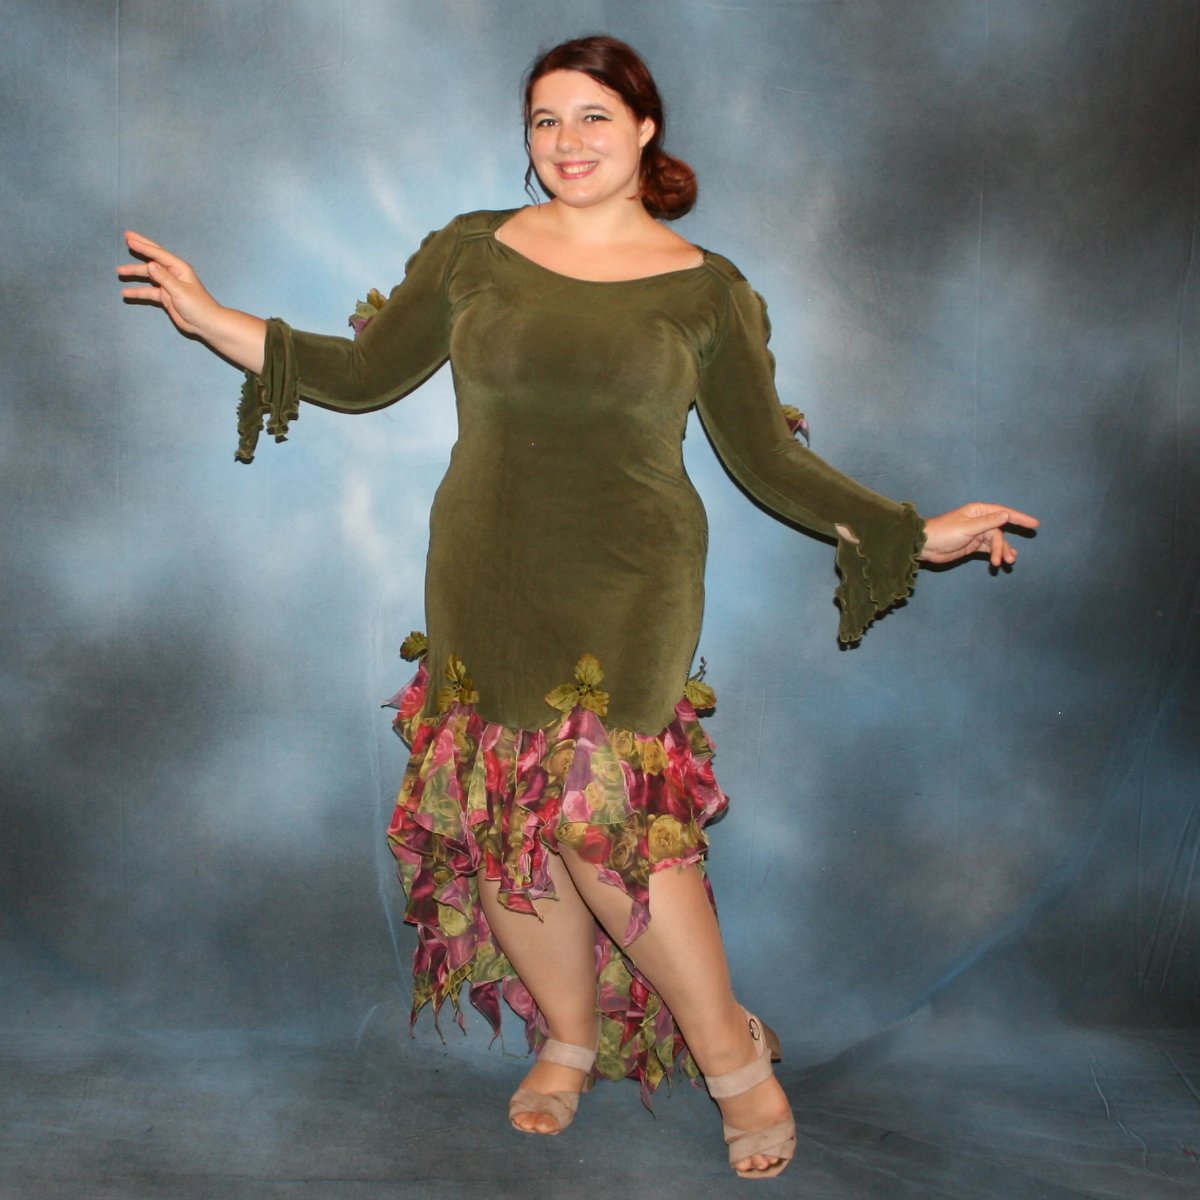 Crystal's Creations Green ballroom social dance dress created in luxurious olive green solid slinky fabric with chiffon flounces of roses pattern in burgundies & deep pinks, embellished with silk leaves & a touch of Swarovski rhinestones.